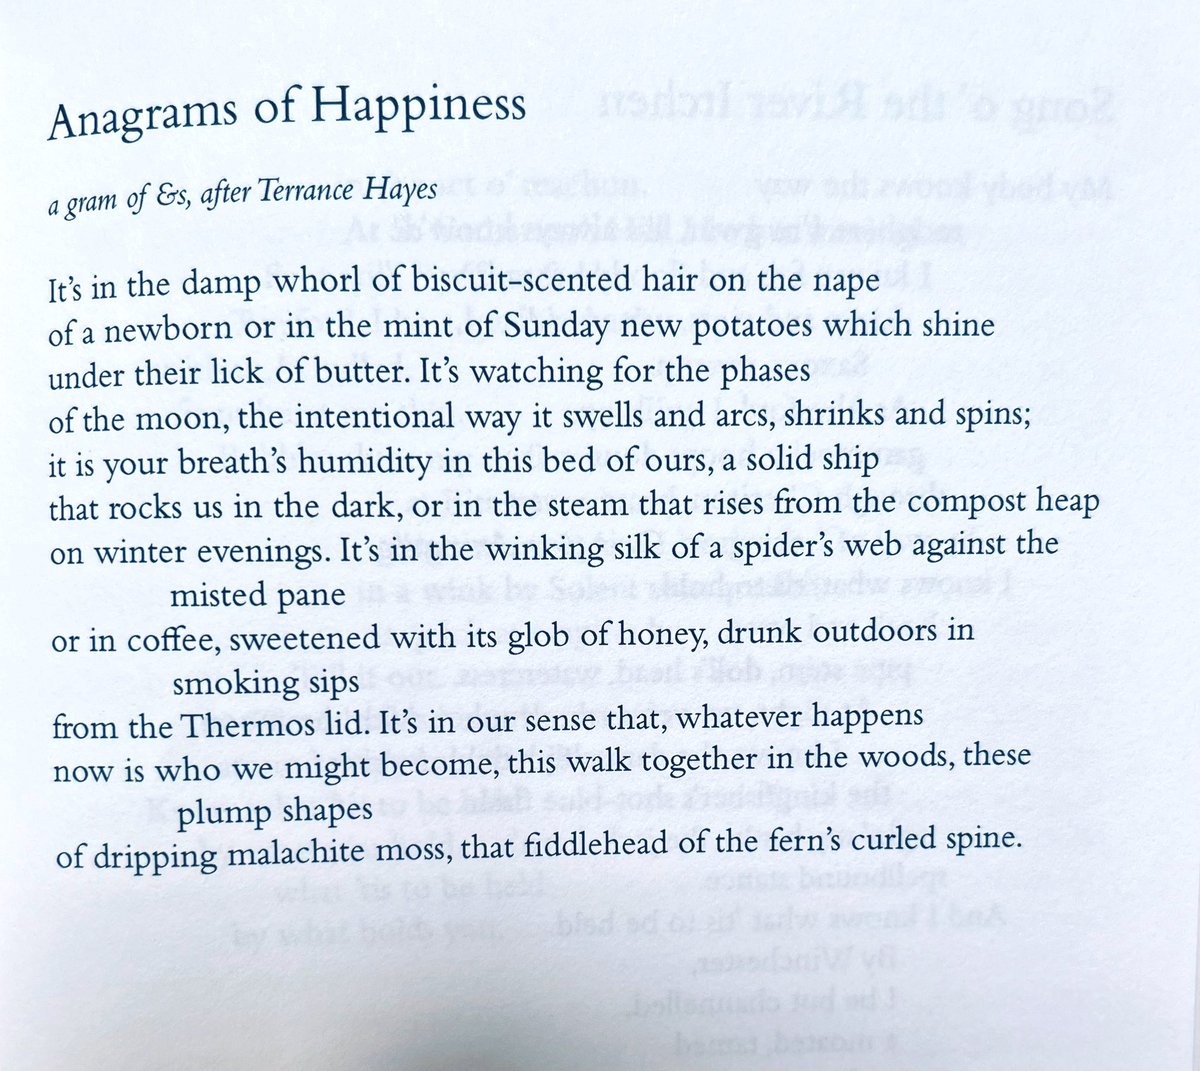 “whatever happens / now is who we might become” On this very sad day, I want to share a happy poem by Kathryn Bevis, an immensely kind poet who deserves to always be remembered with a smile. From her exquisite collection, The Butterfly House 🦋